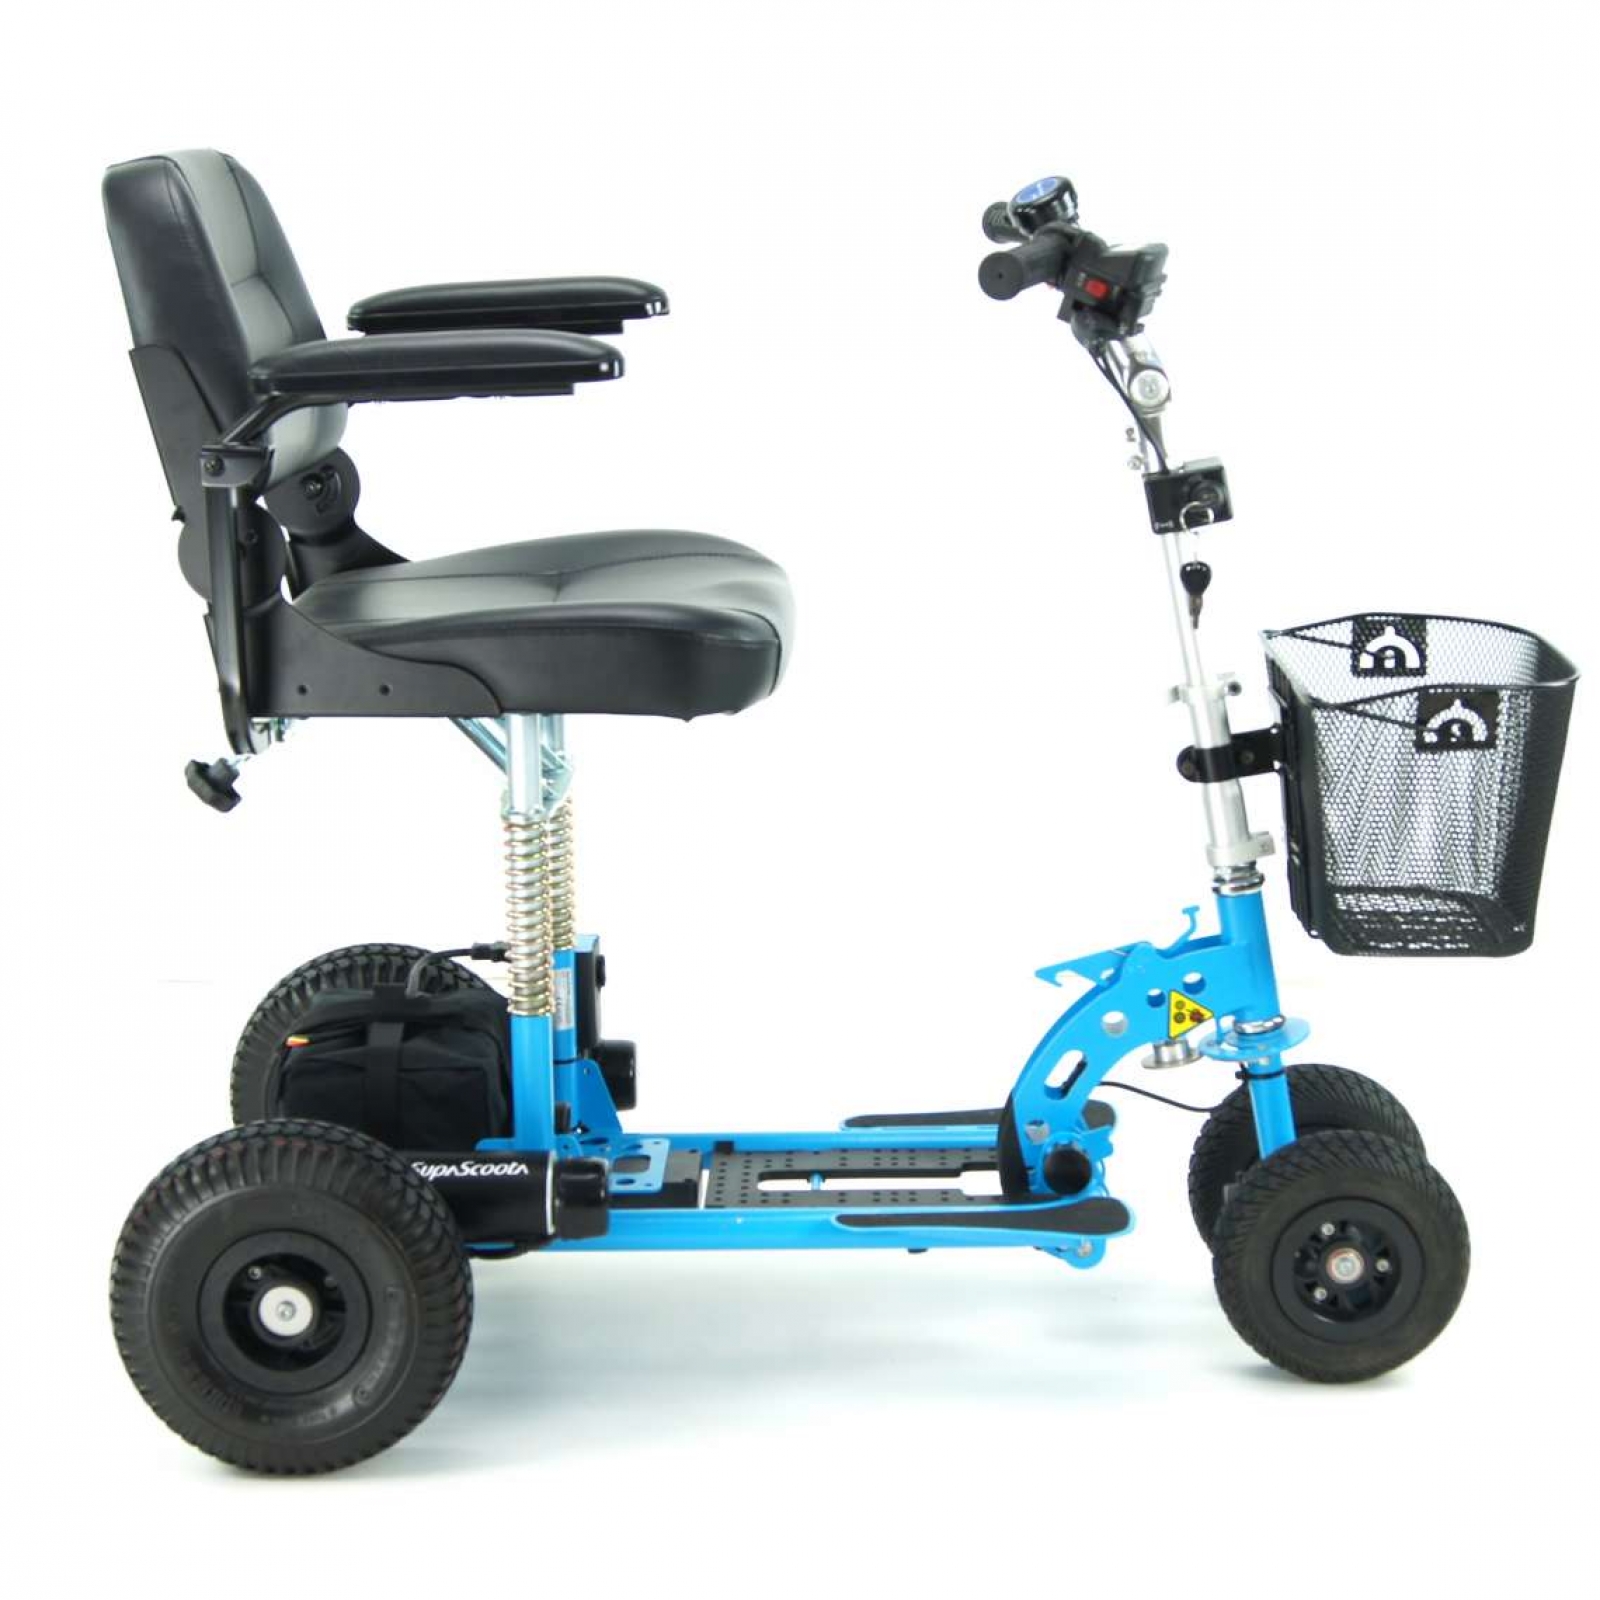 SupaScoota Sport HD Portable Mobility Scooter